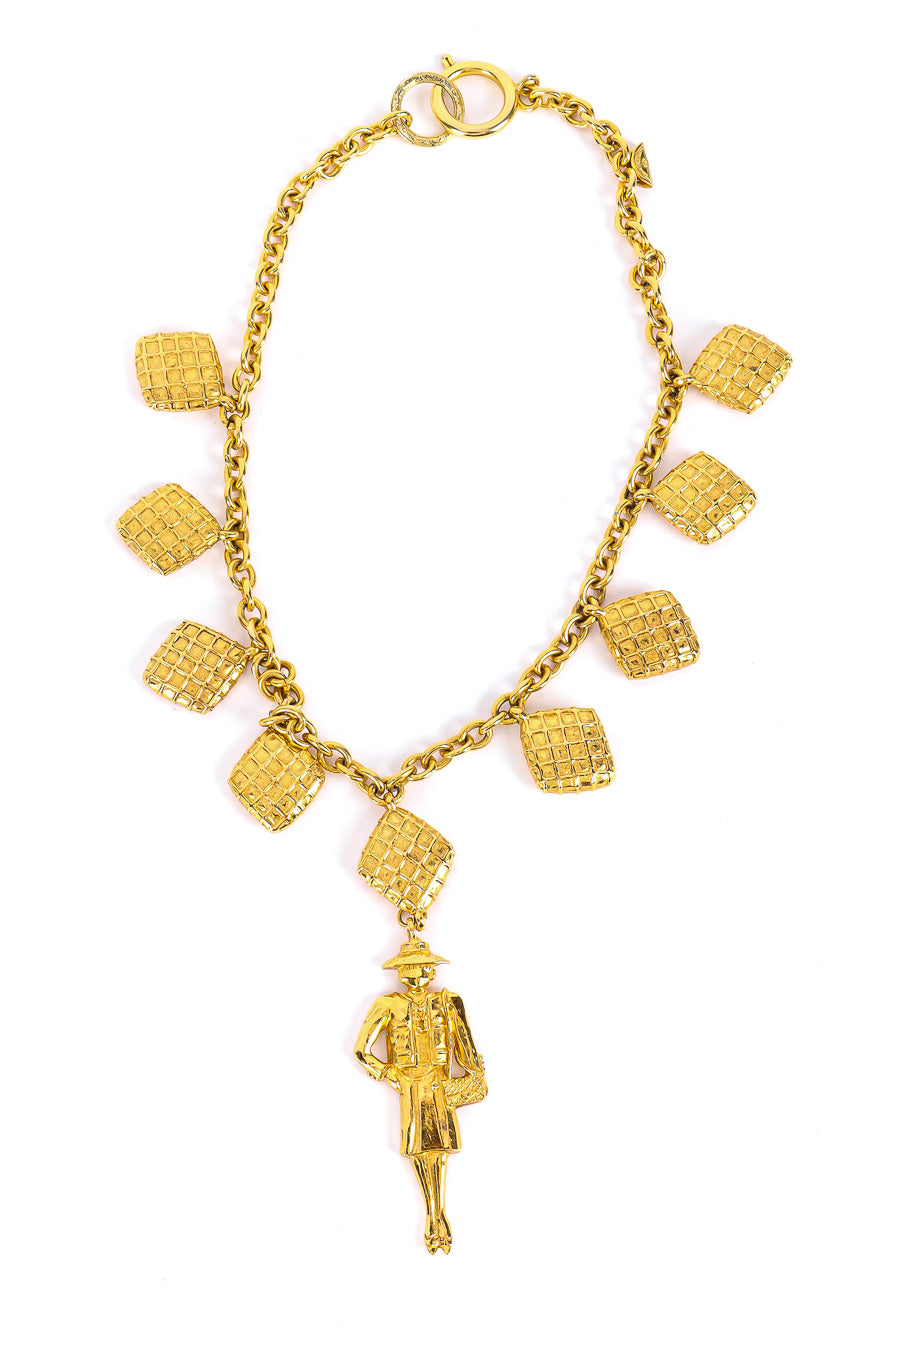 Vintage Chanel Mademoiselle Charm Necklace Flat Lay @recessla